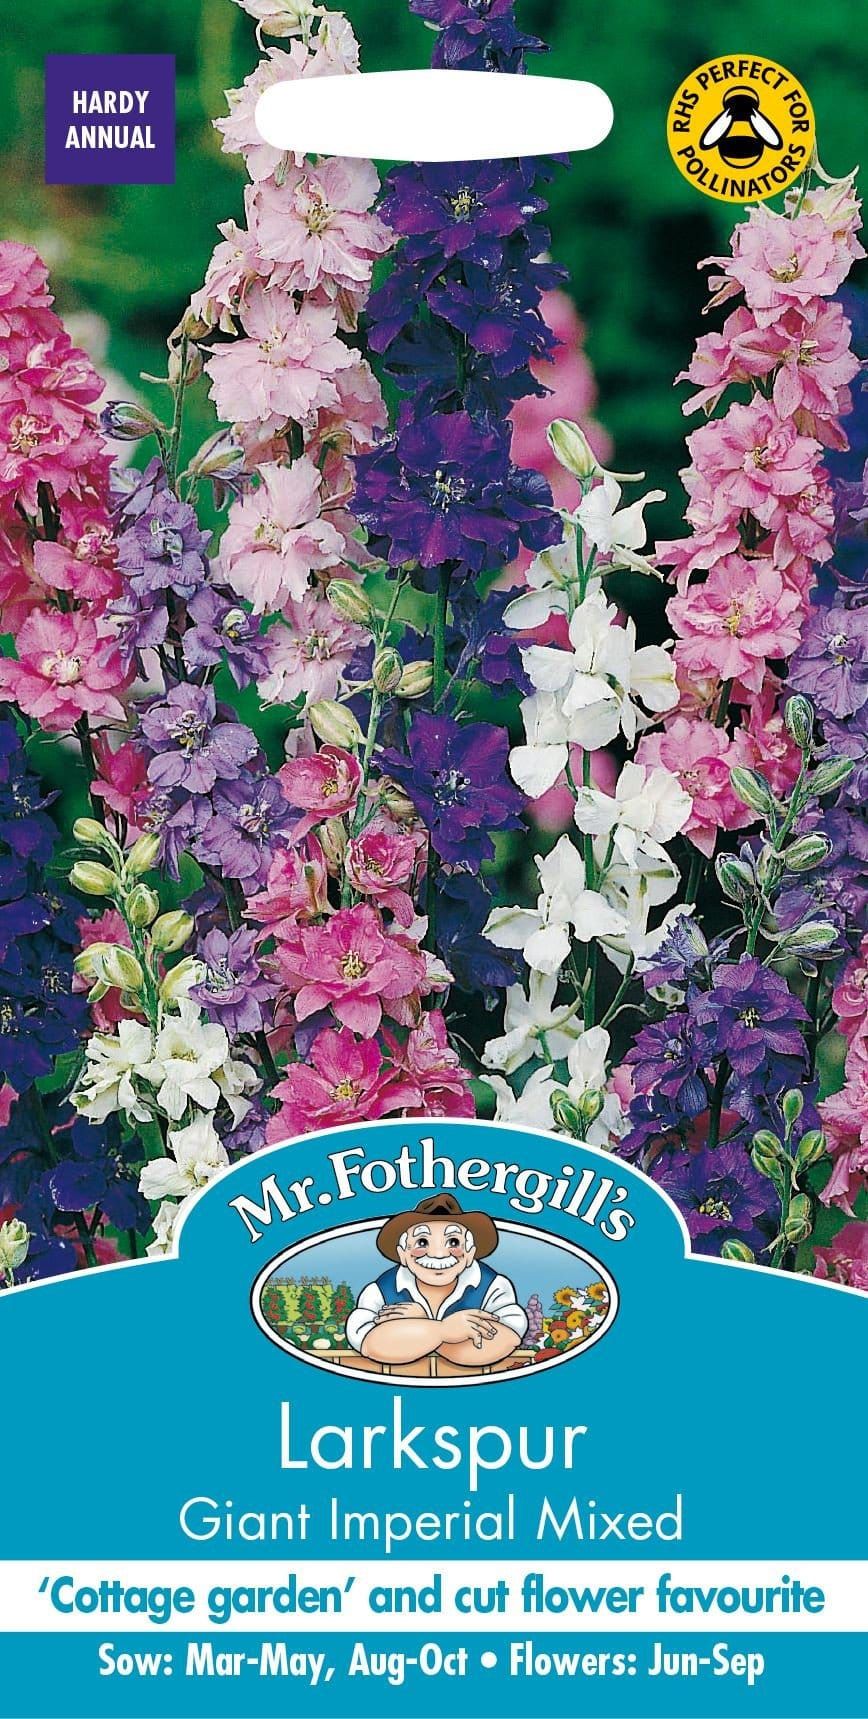 Mr Fothergills Larkspur Giant Imperial Mixed 300 Seeds